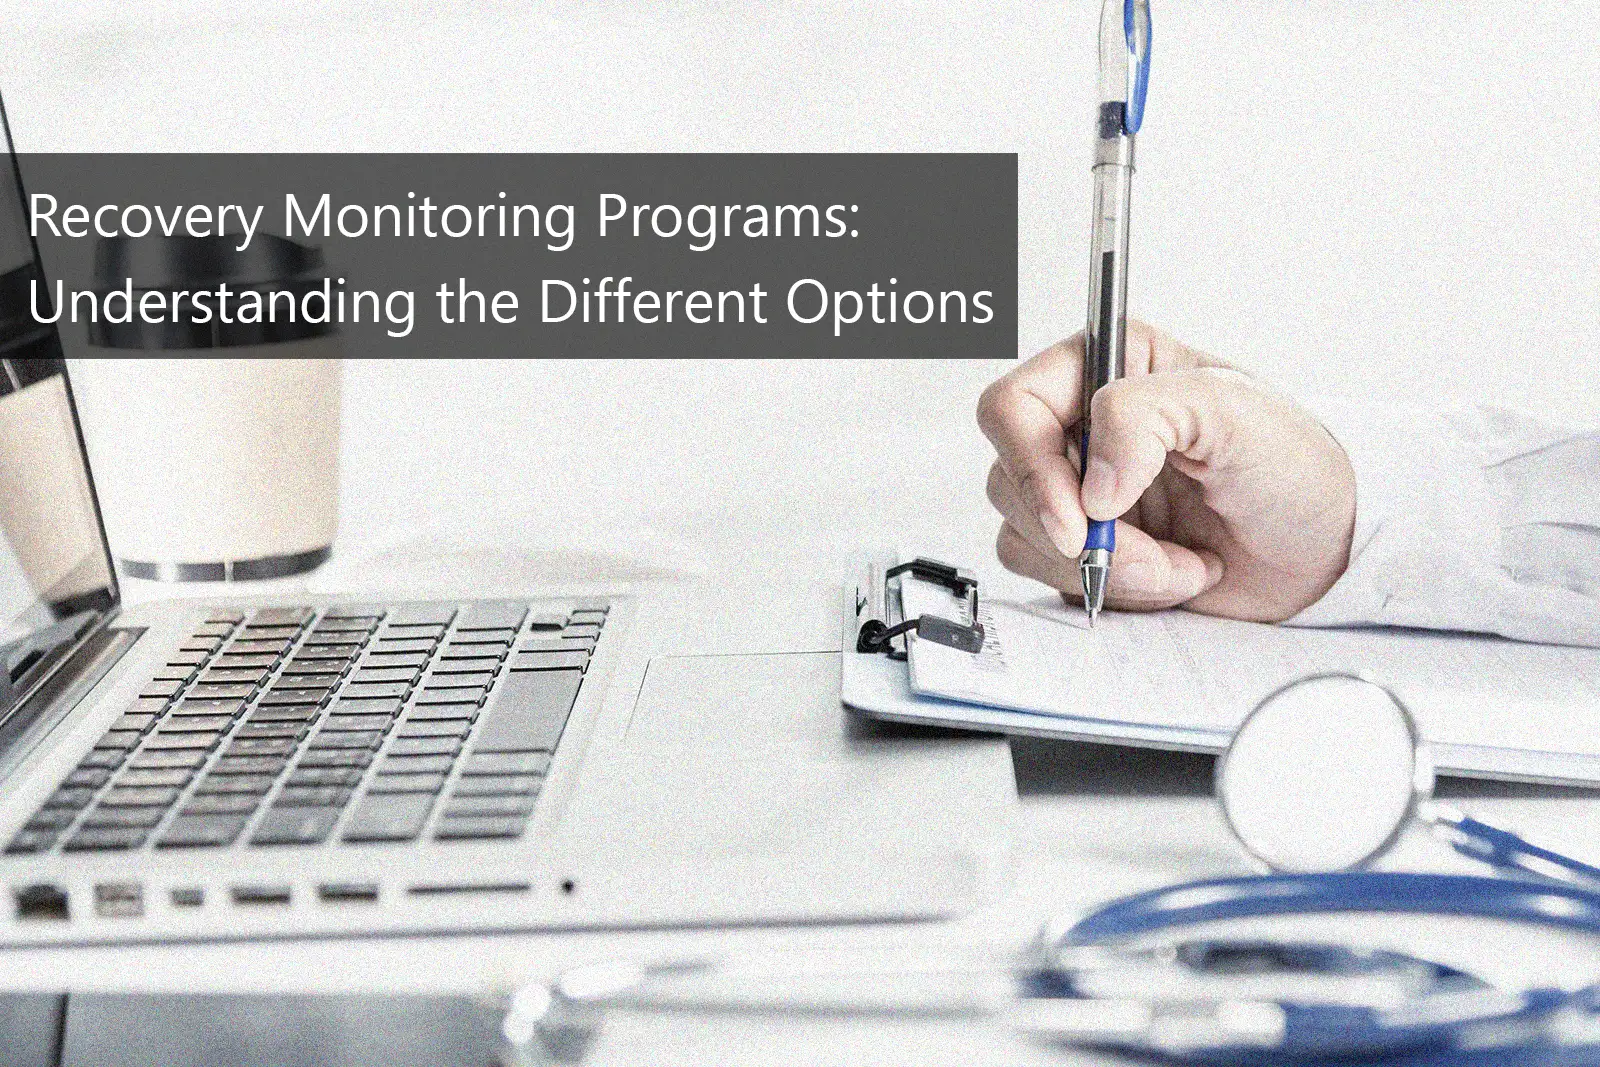 Recovery Monitoring Programs: Testing Options Explained